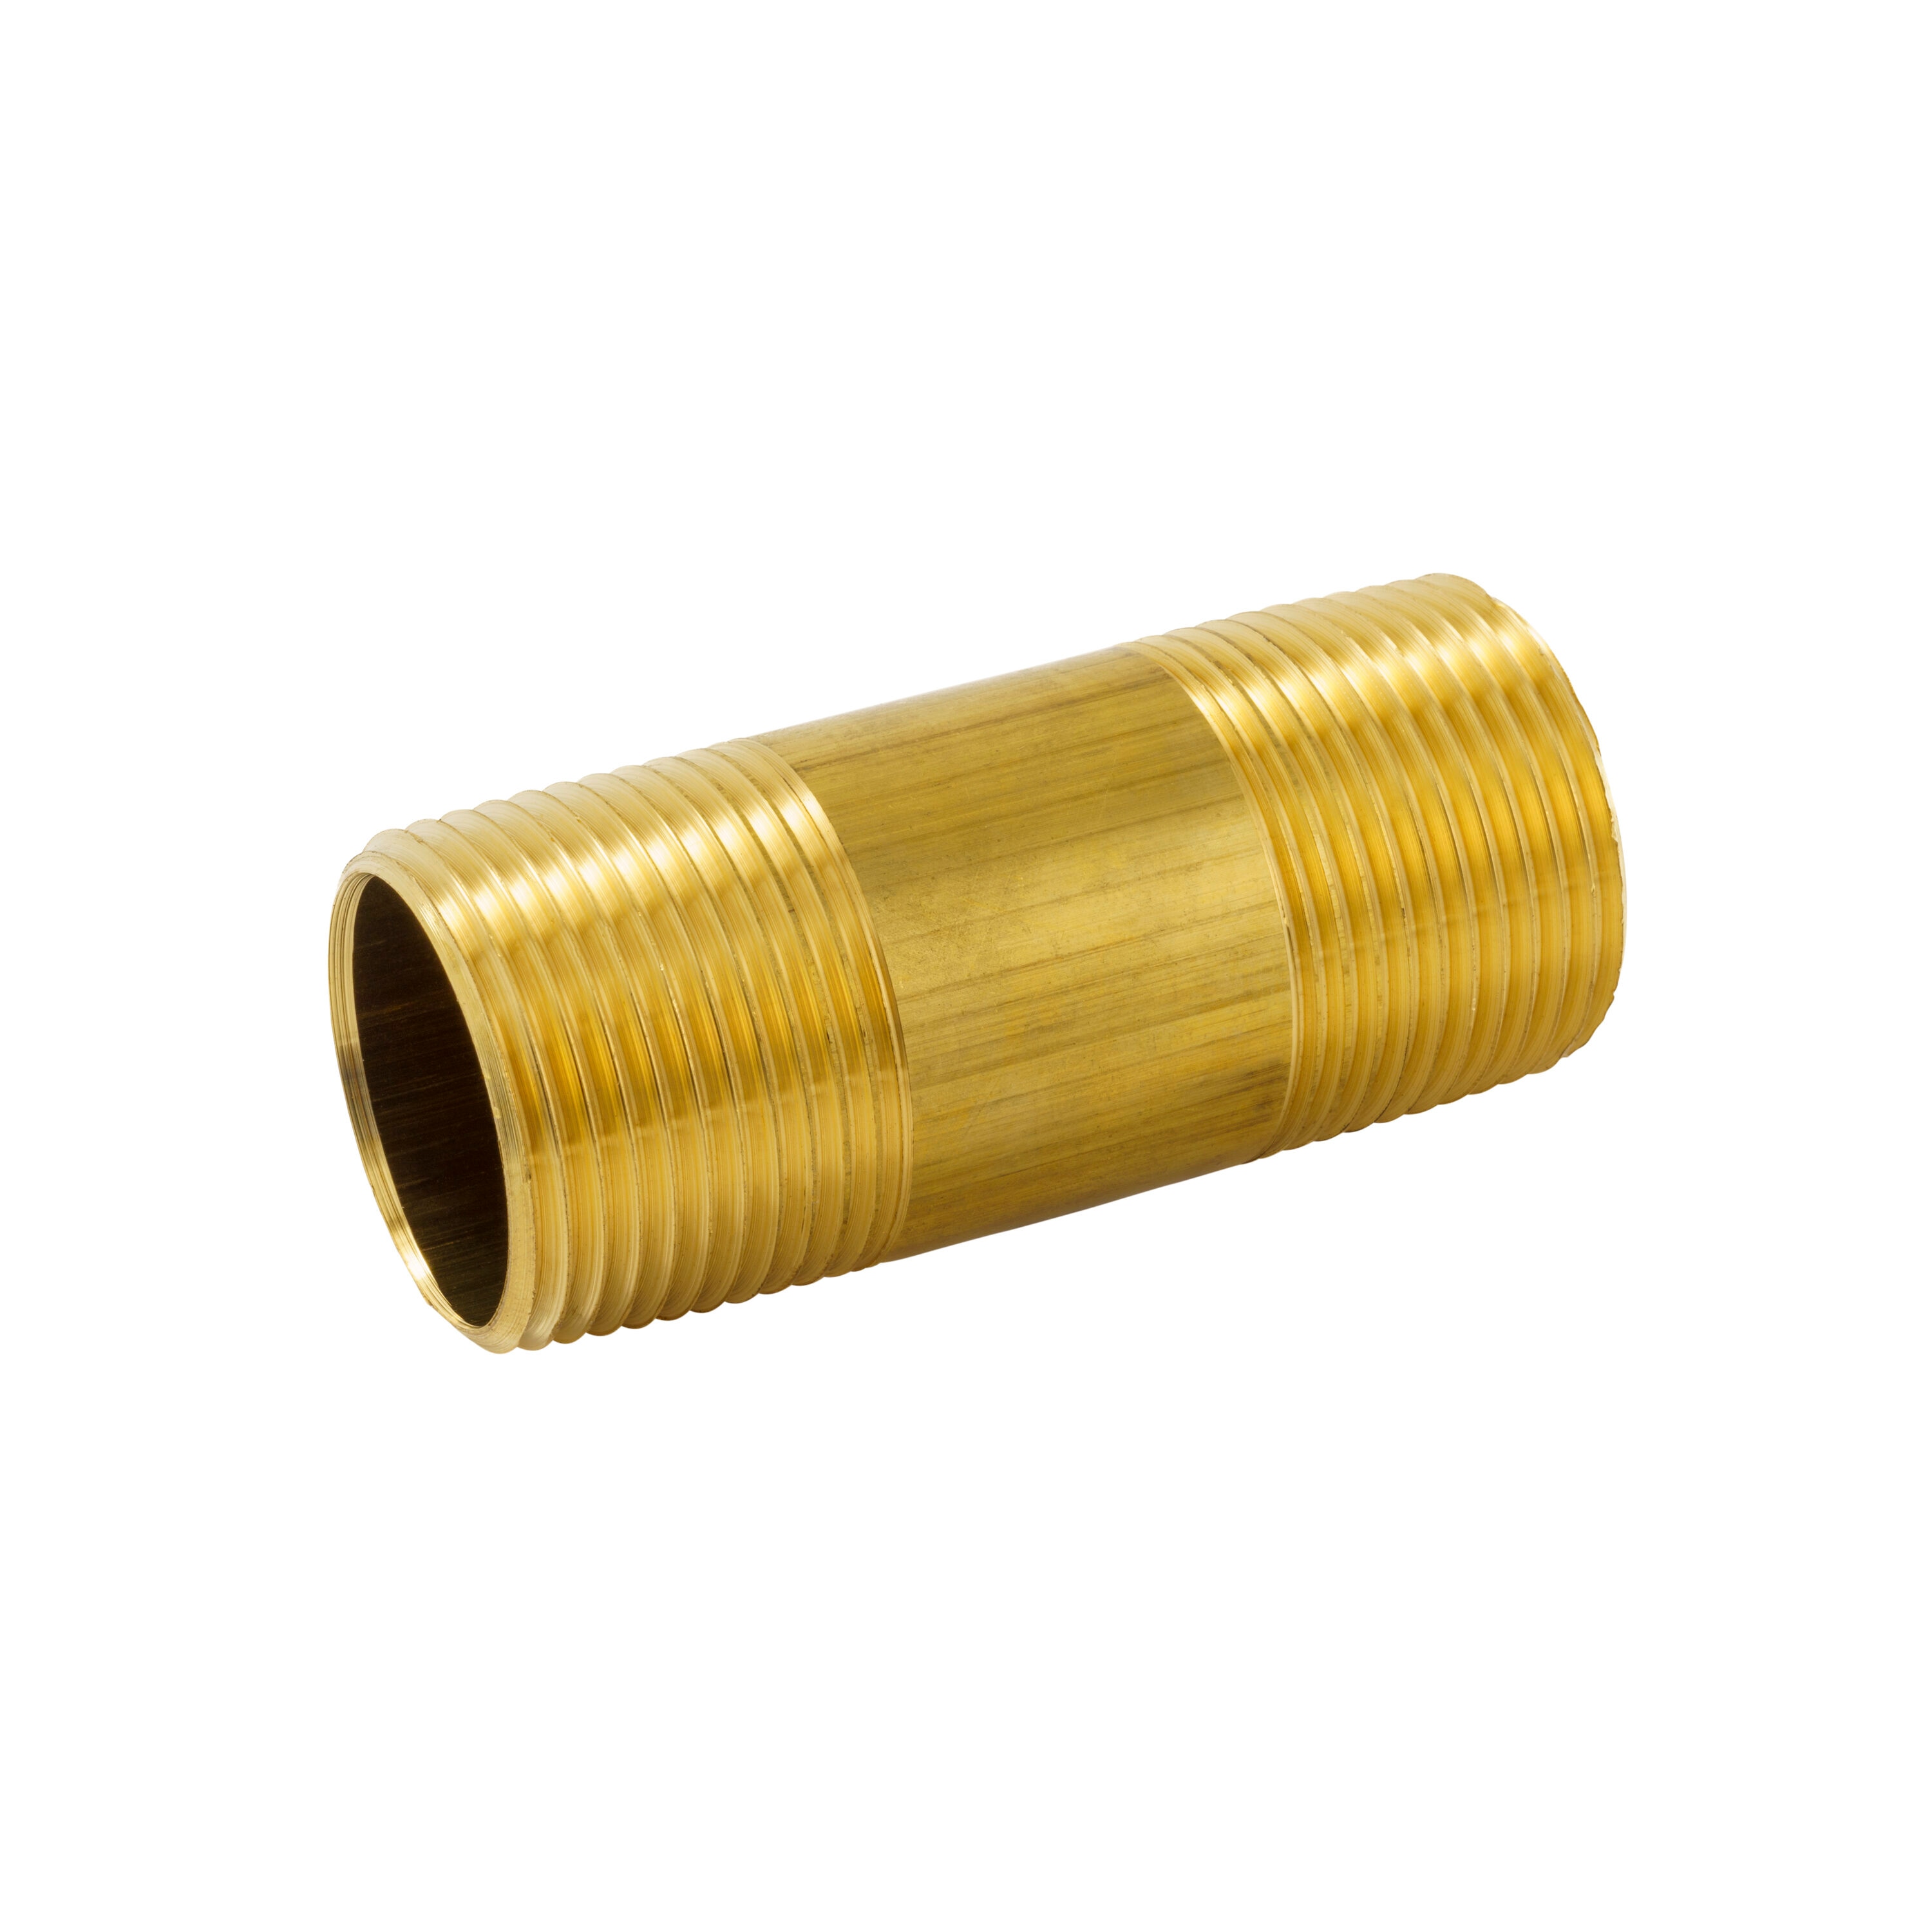 Proline Series 1-in x 1-in Threaded Male Adapter Nipple Fitting in